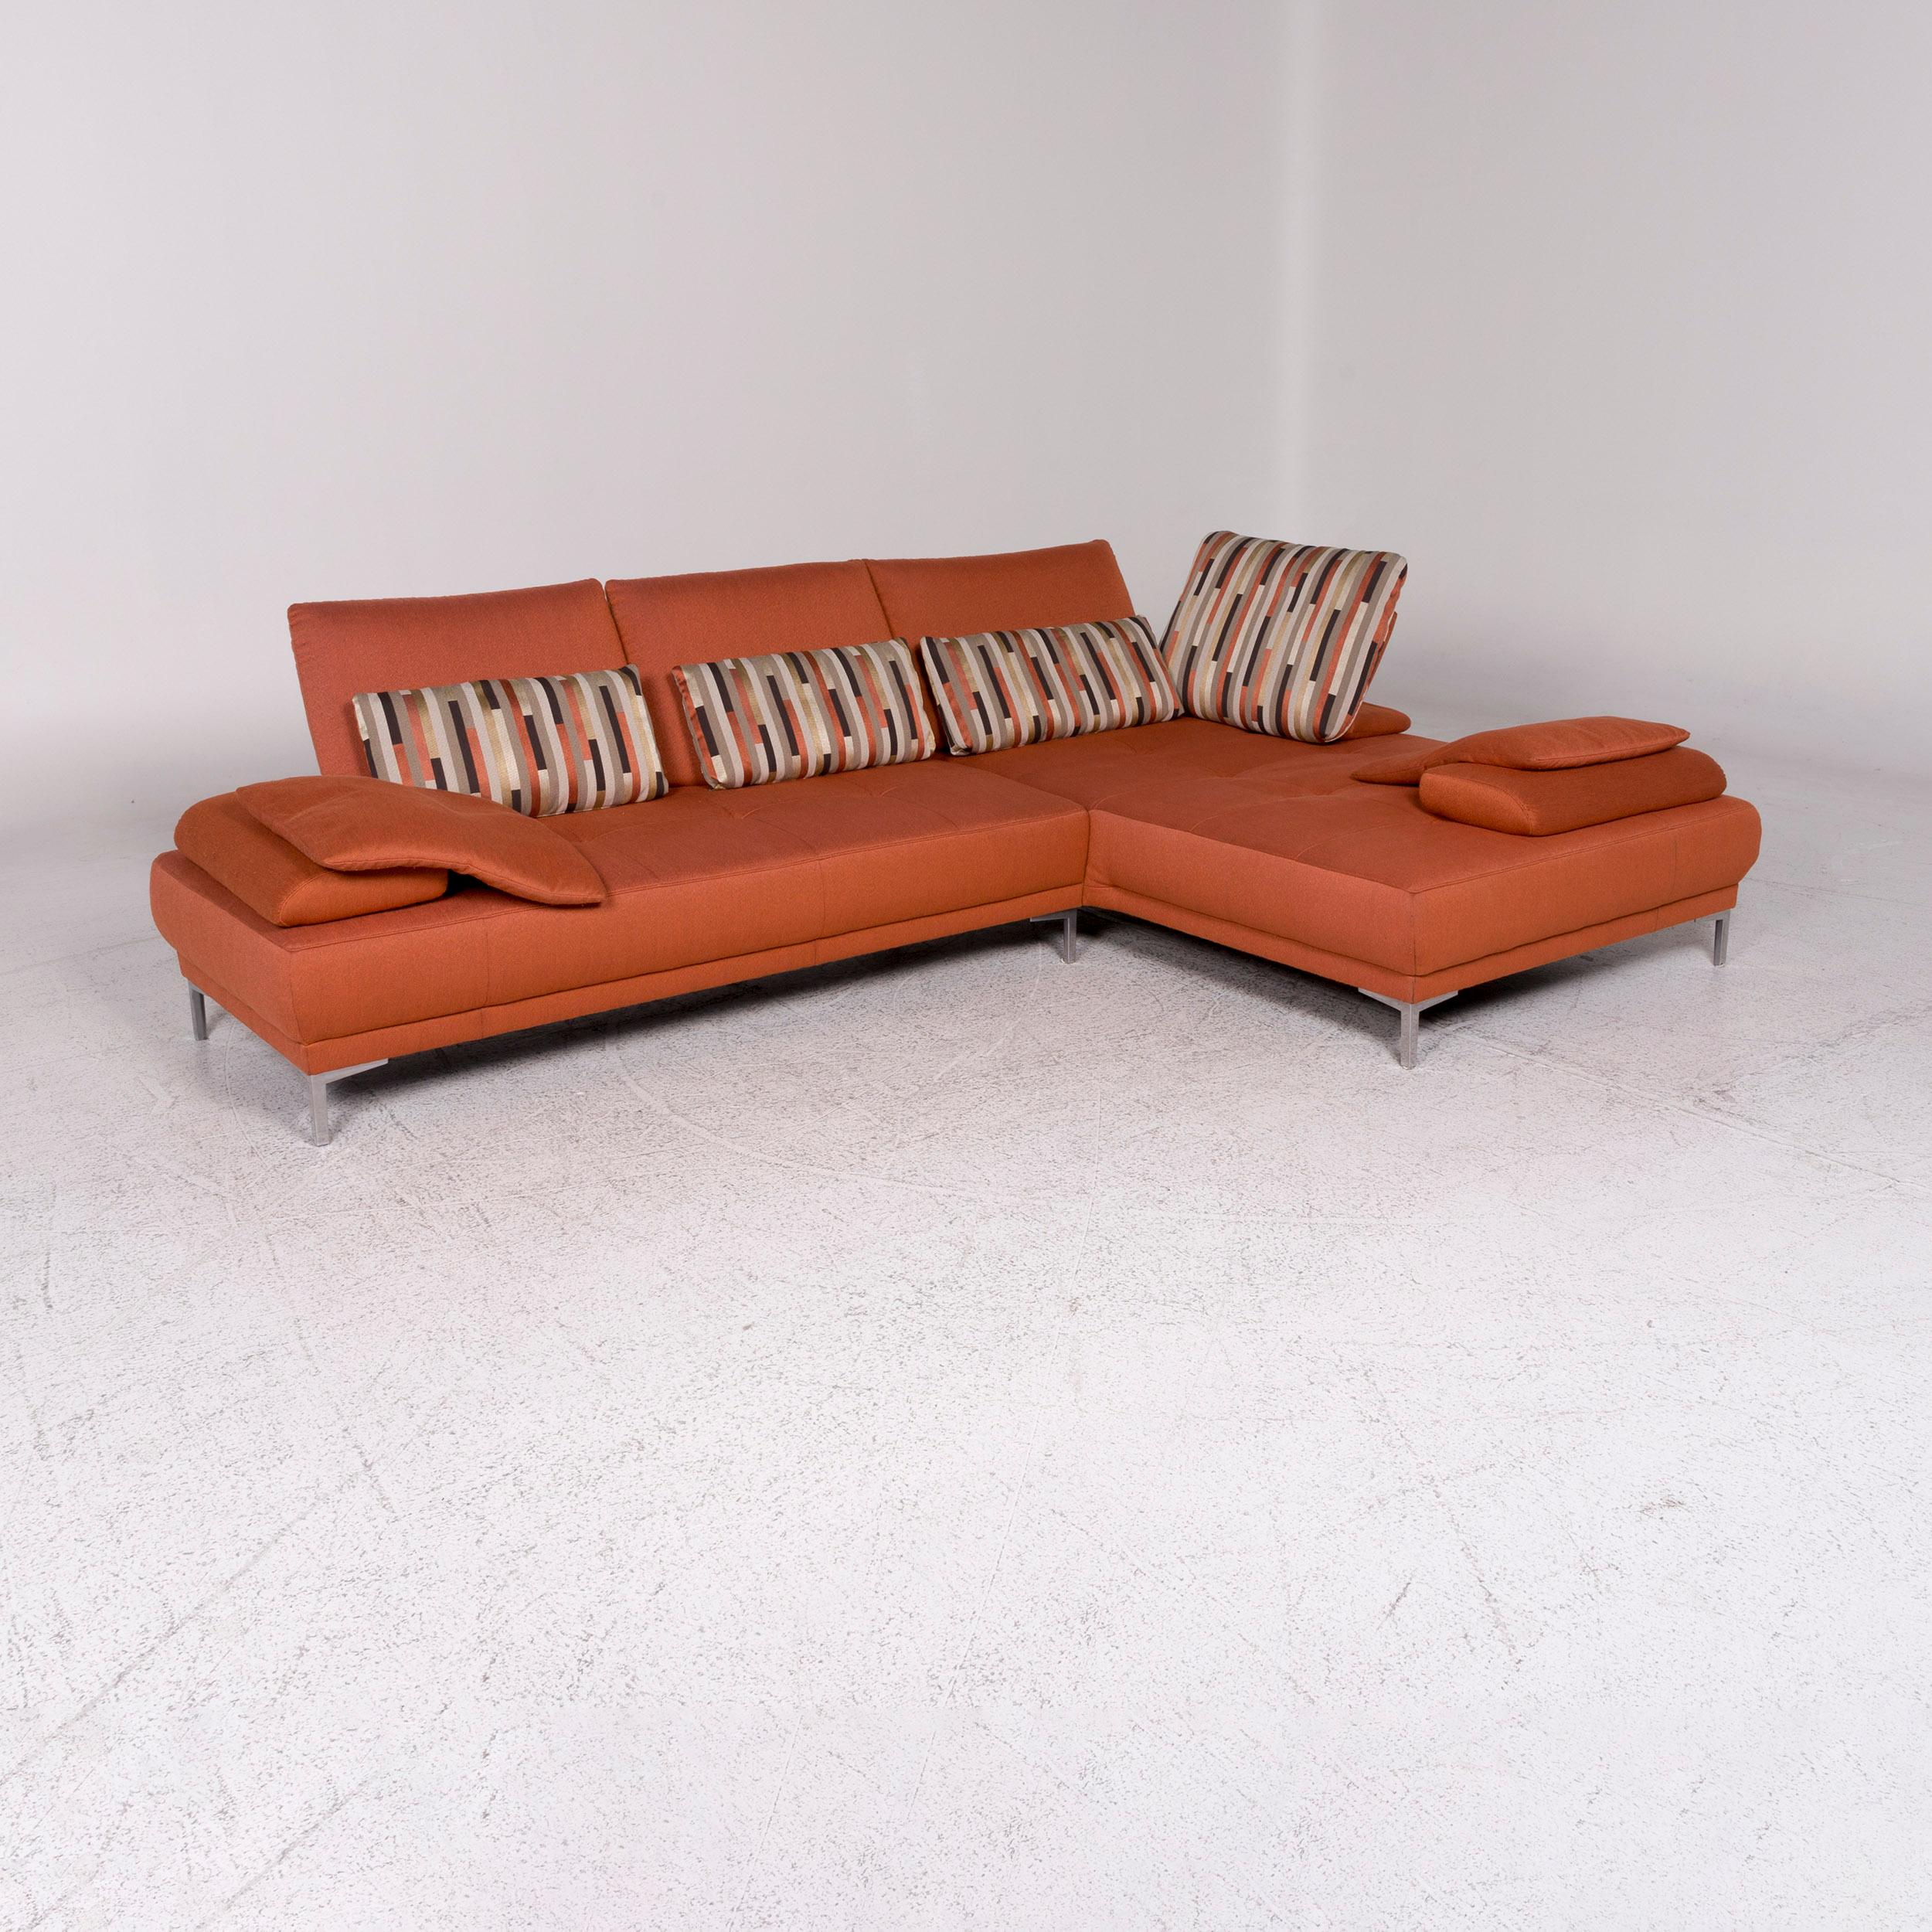 We bring to you a Willi Schillig fabric sofa set orange corner sofa stool.
 
Product measurements in centimetres:
 
Depth 94
Width 291
Height 83
Seat-height 41
Rest-height 53
Seat-depth 59
Seat-width 215
Back-height 42.

  